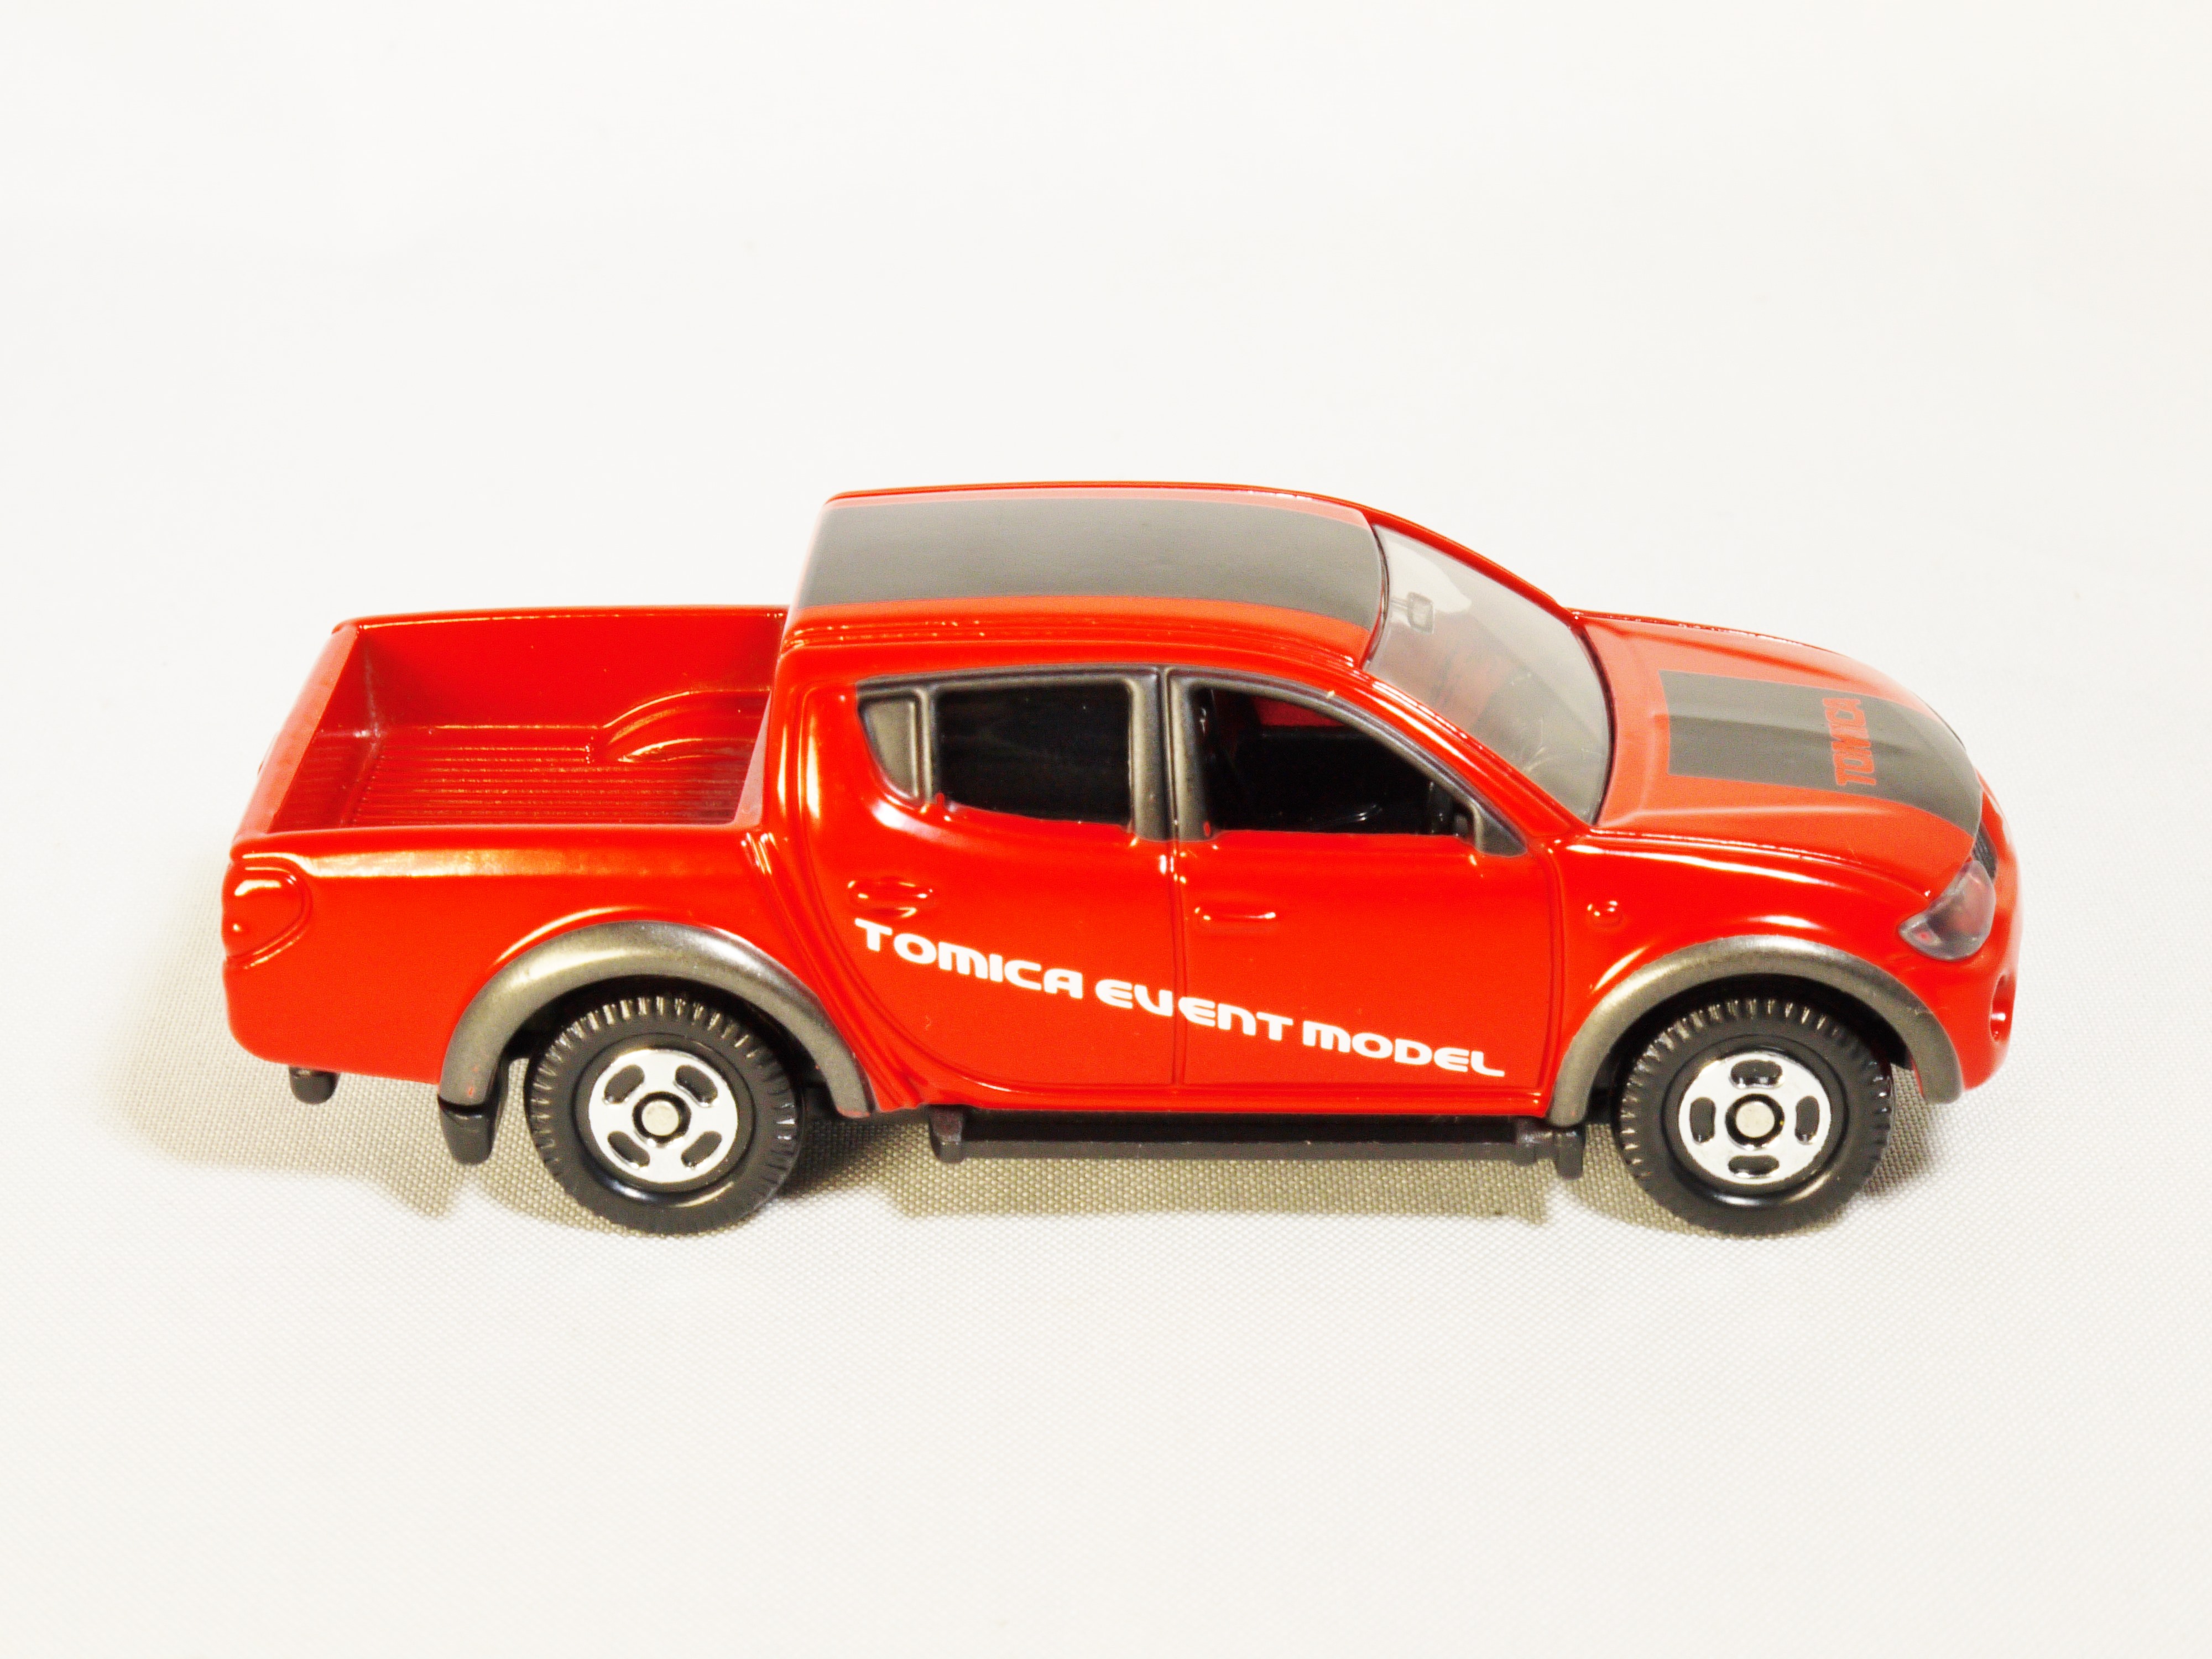 TOMICA Lottery 22 FireFighter Collection Mitsubishi Triton 1//66 TOMY NEW 109